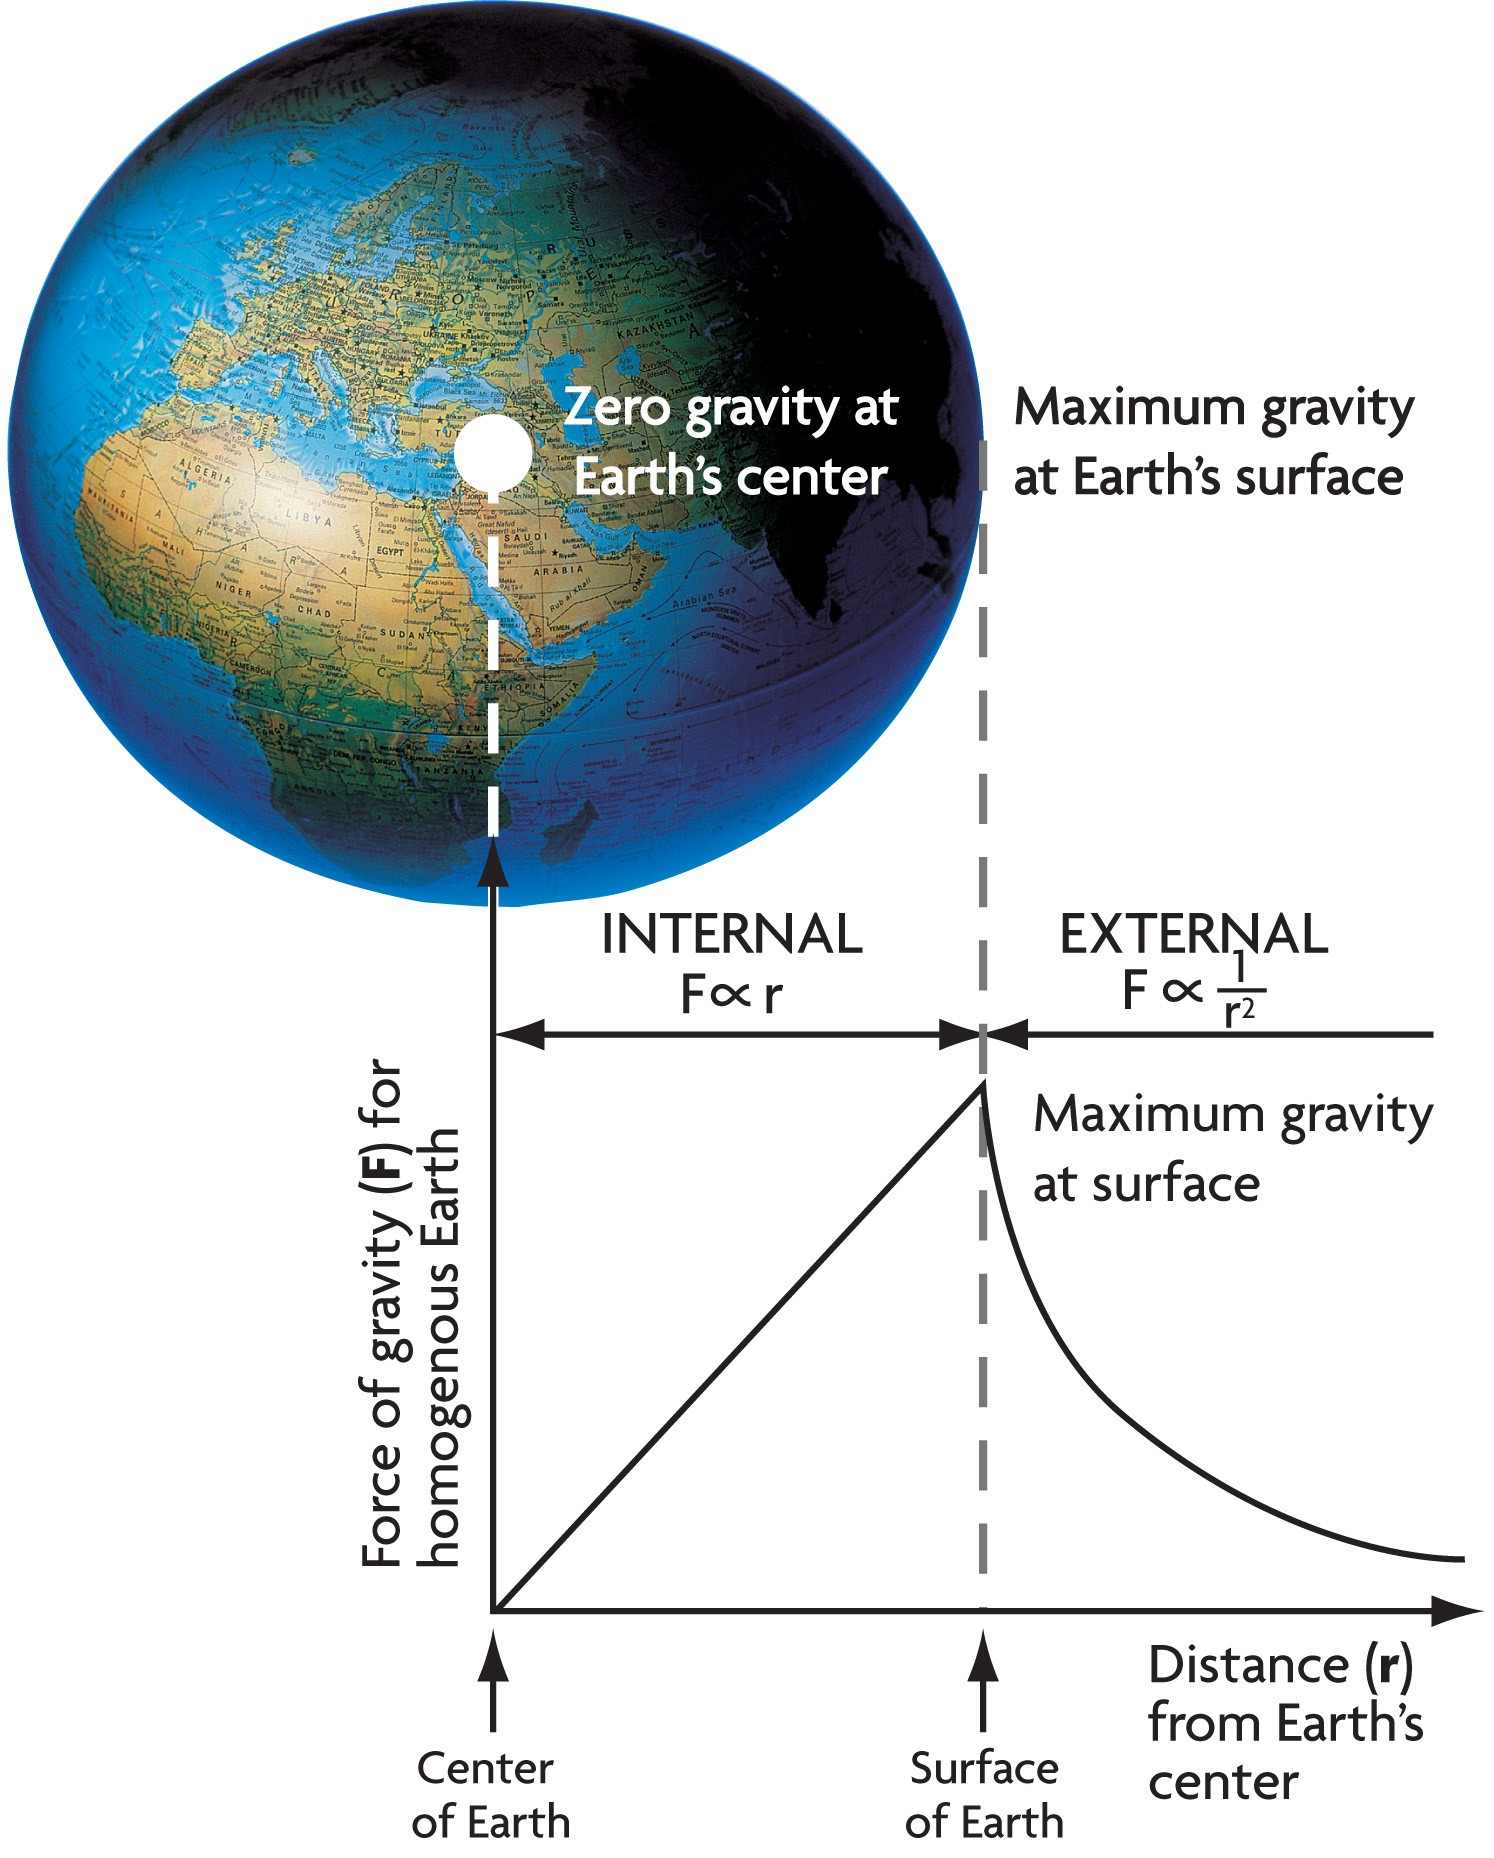 The force of gravity, and hence your weight, increases linearly (falsely assuming uniform density) from zero at Earth's center to maximum at the surface, then decreases according to the inverse square law.